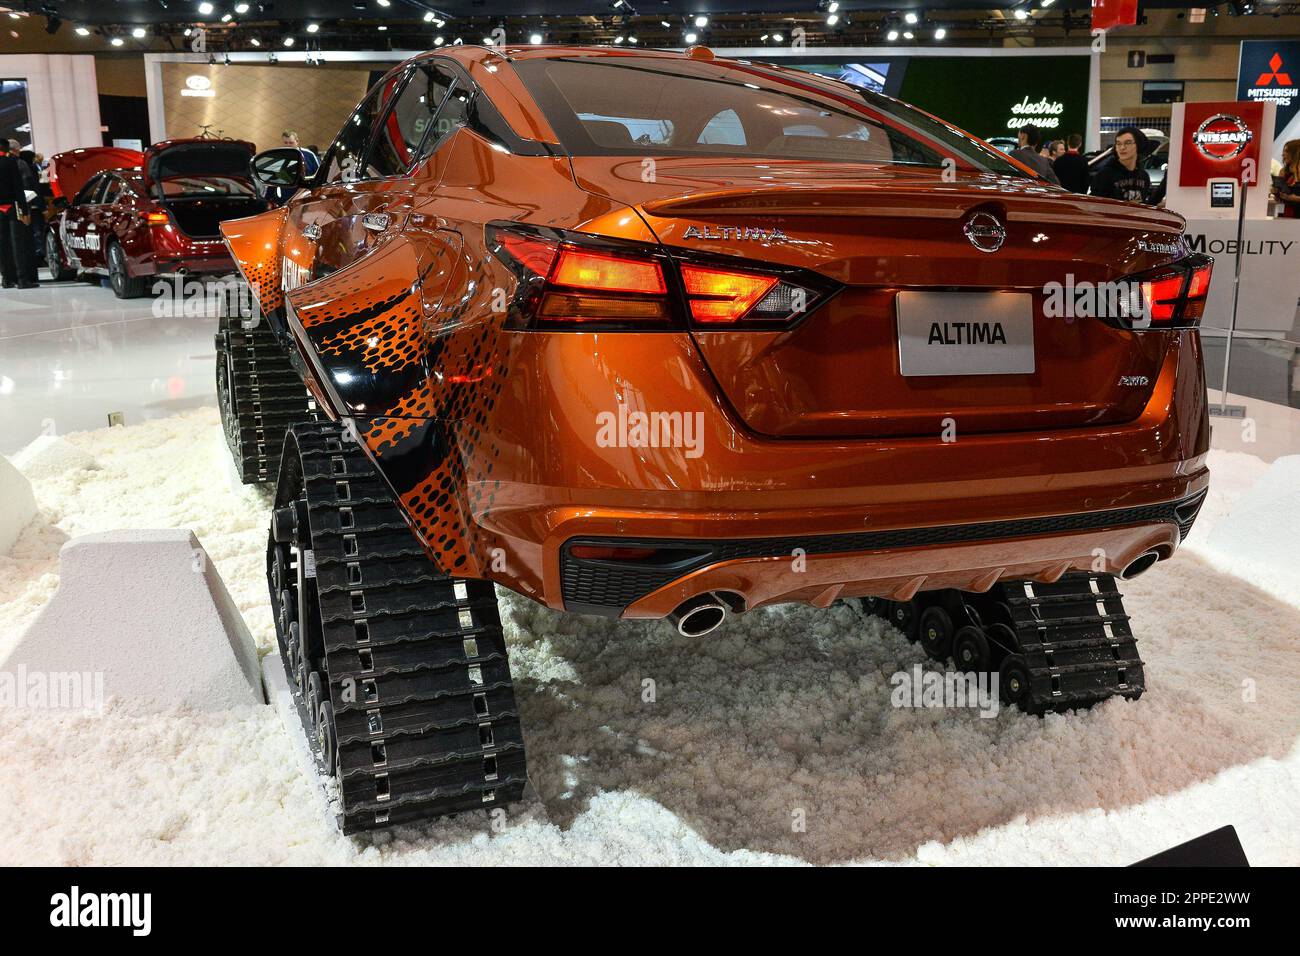 Toronto, ON,  Canada - February 15, 2019: Presentation of the cars during the Canadian International Auto Show 2019 at Metro Toronto Convention Center Stock Photo